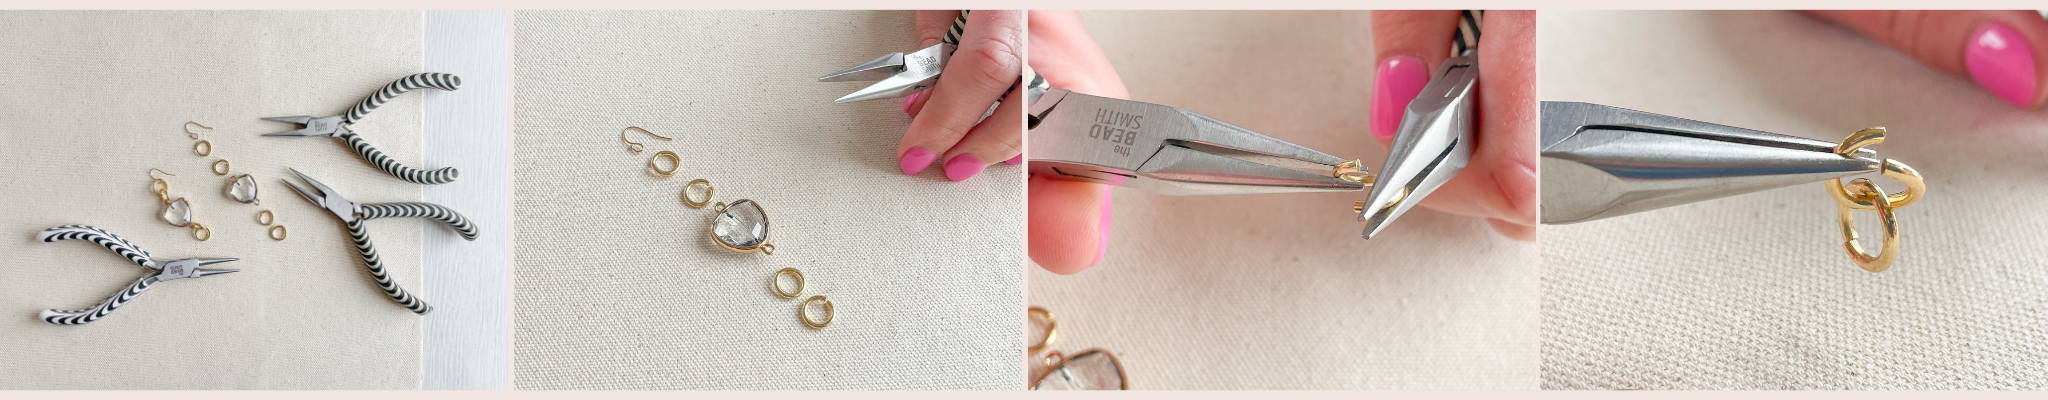 Using Jewelry Connectors To Make Easy Earrings - Happy Hour Projects